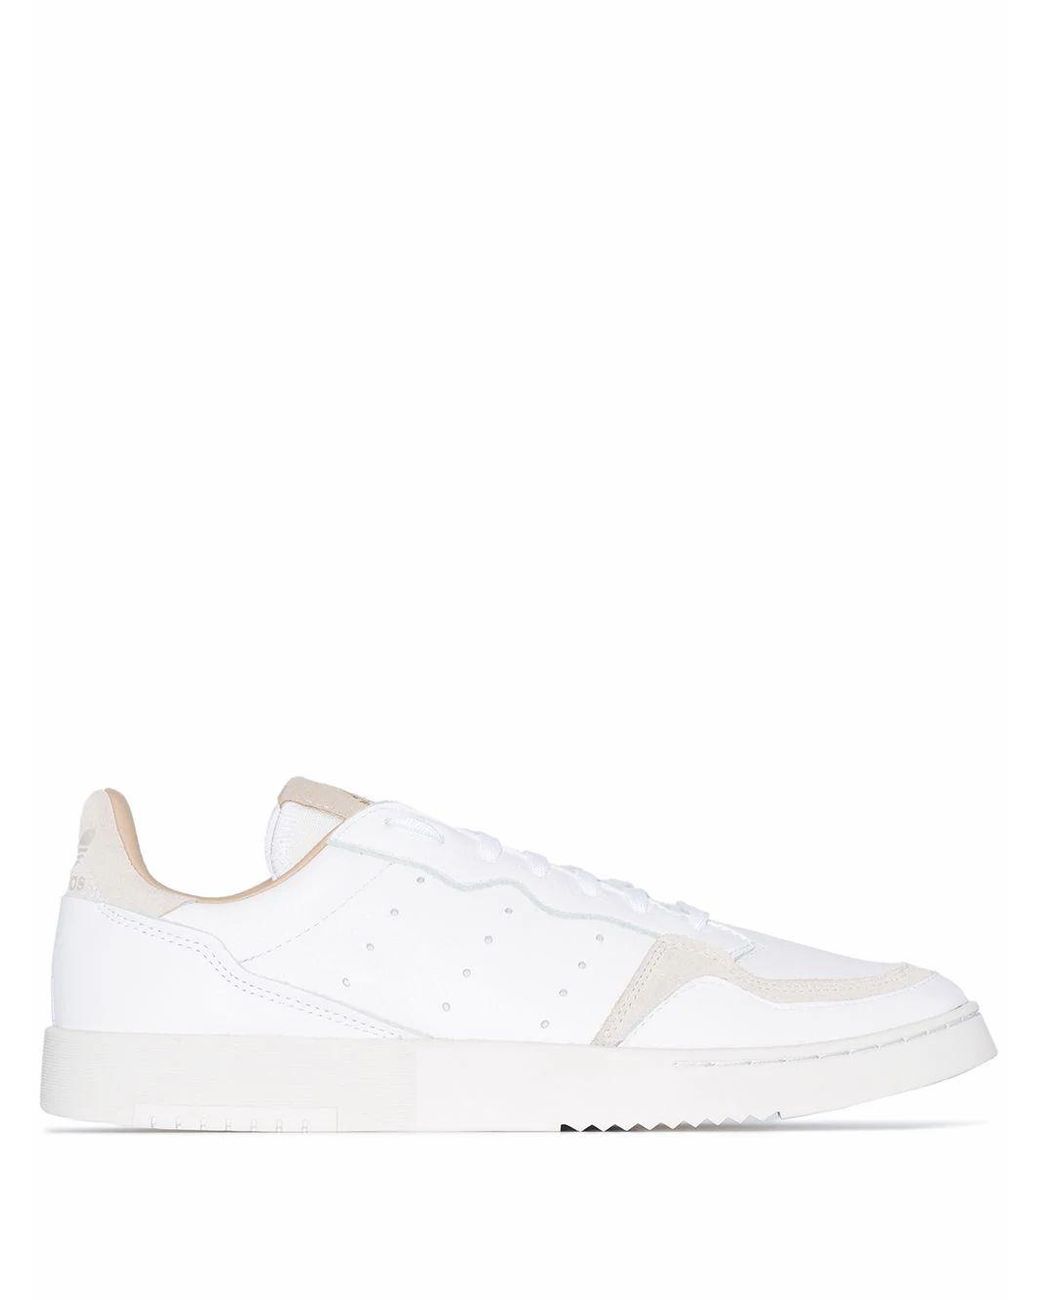 adidas Leather Sneakers in White for Men - Lyst